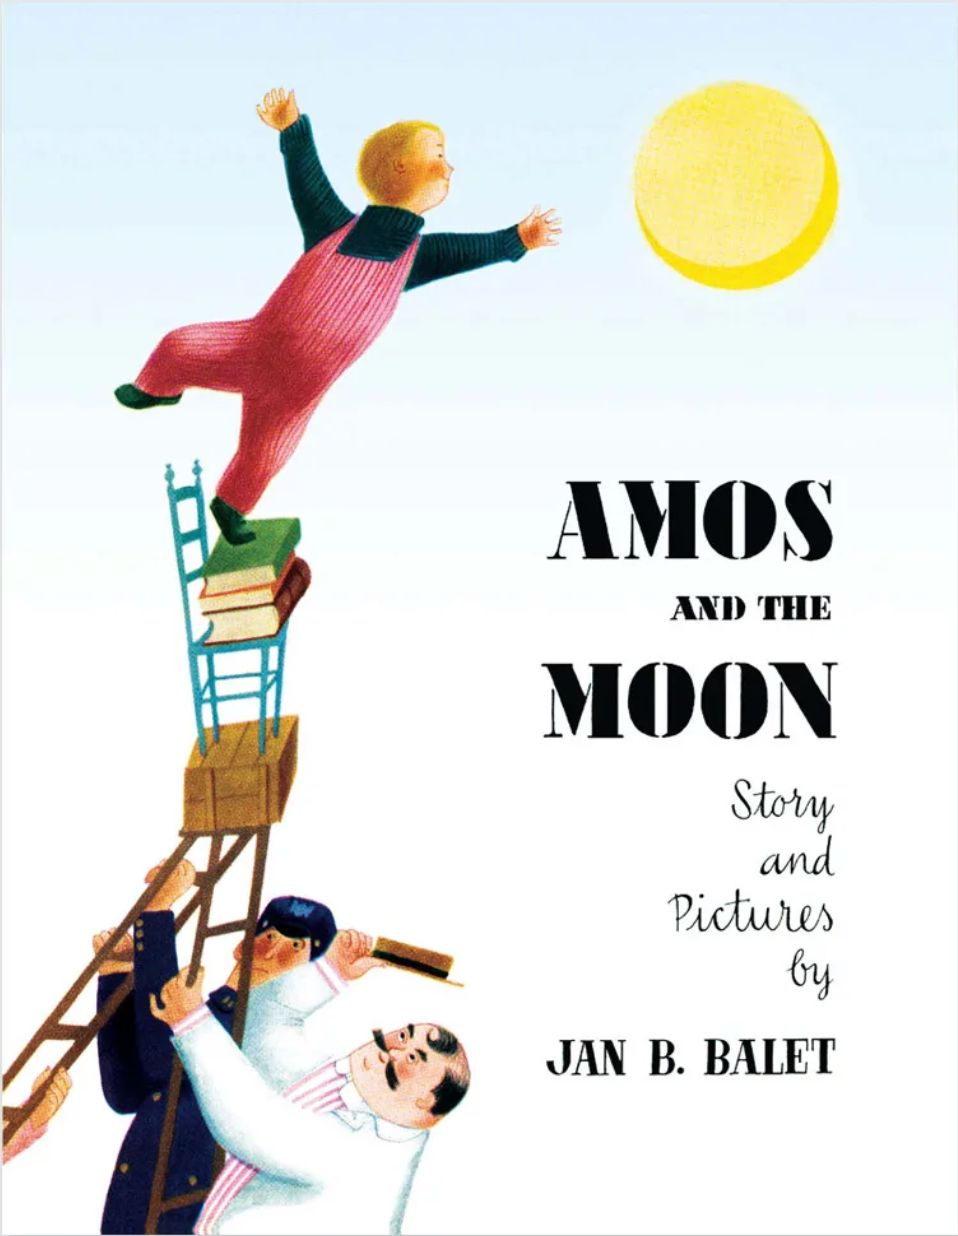 amos and the moon by jan balet